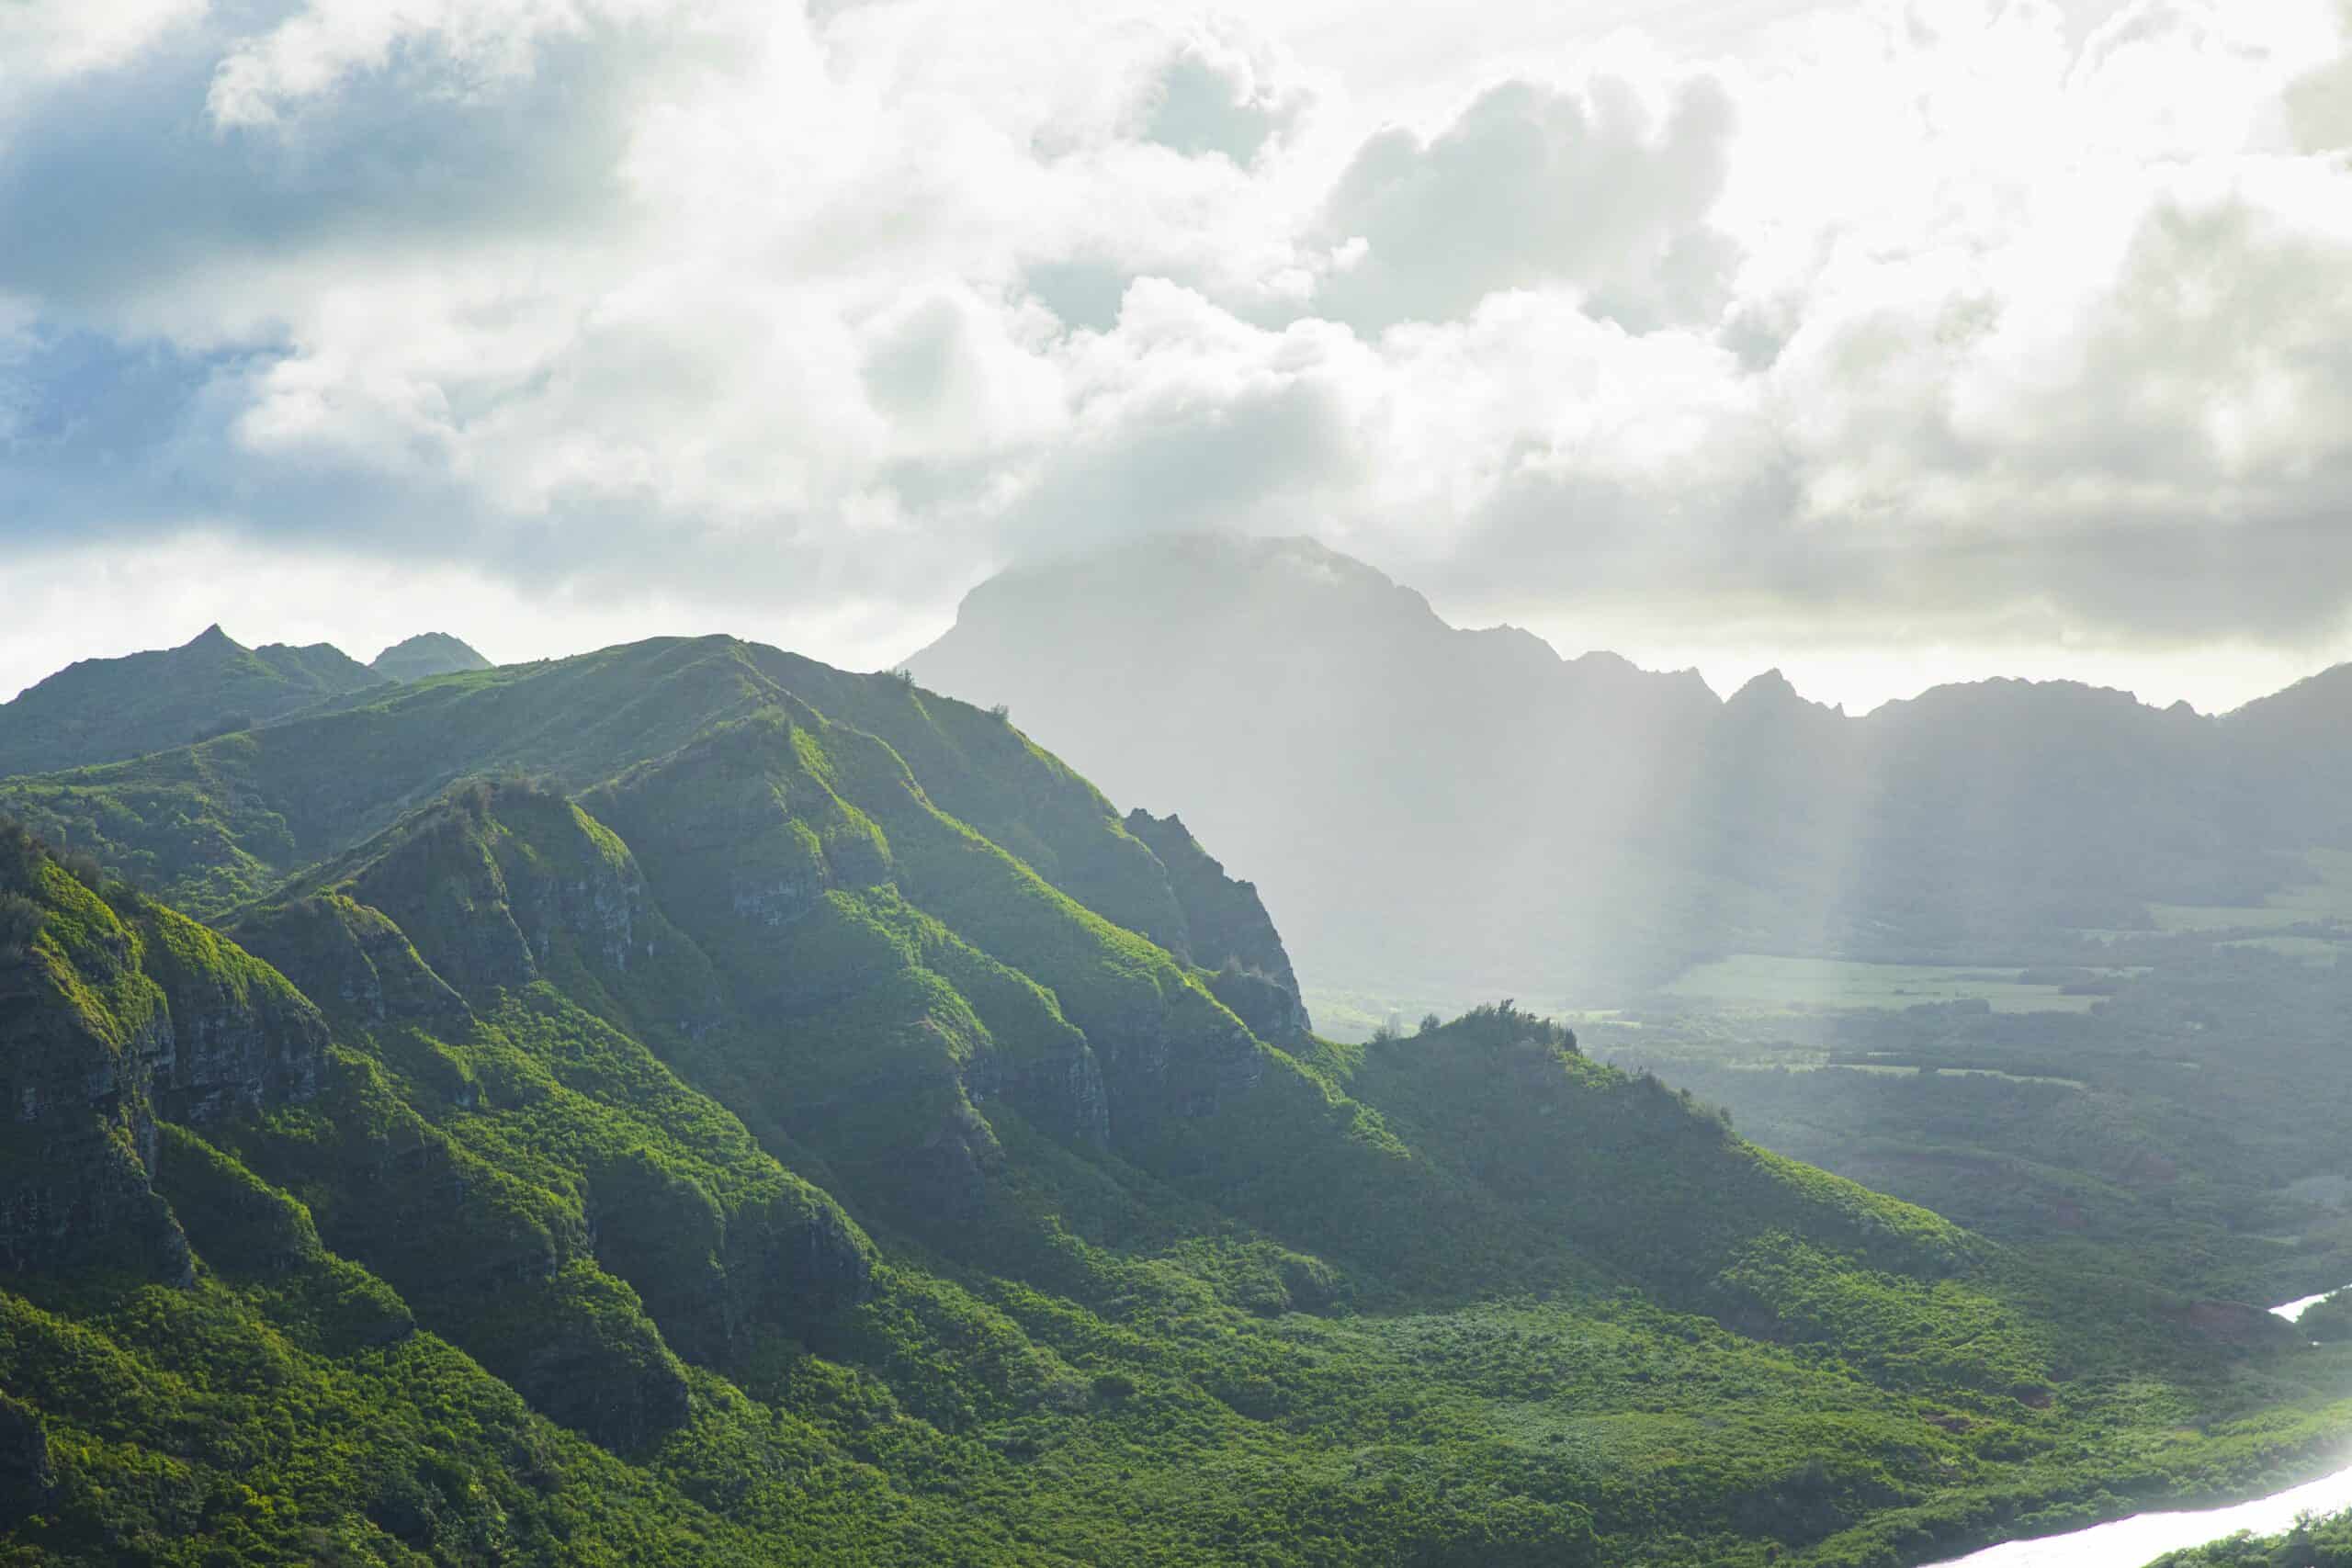 Hawaii forest | Clouds hovering above lush green hawaiian mountain range in golden sunset light